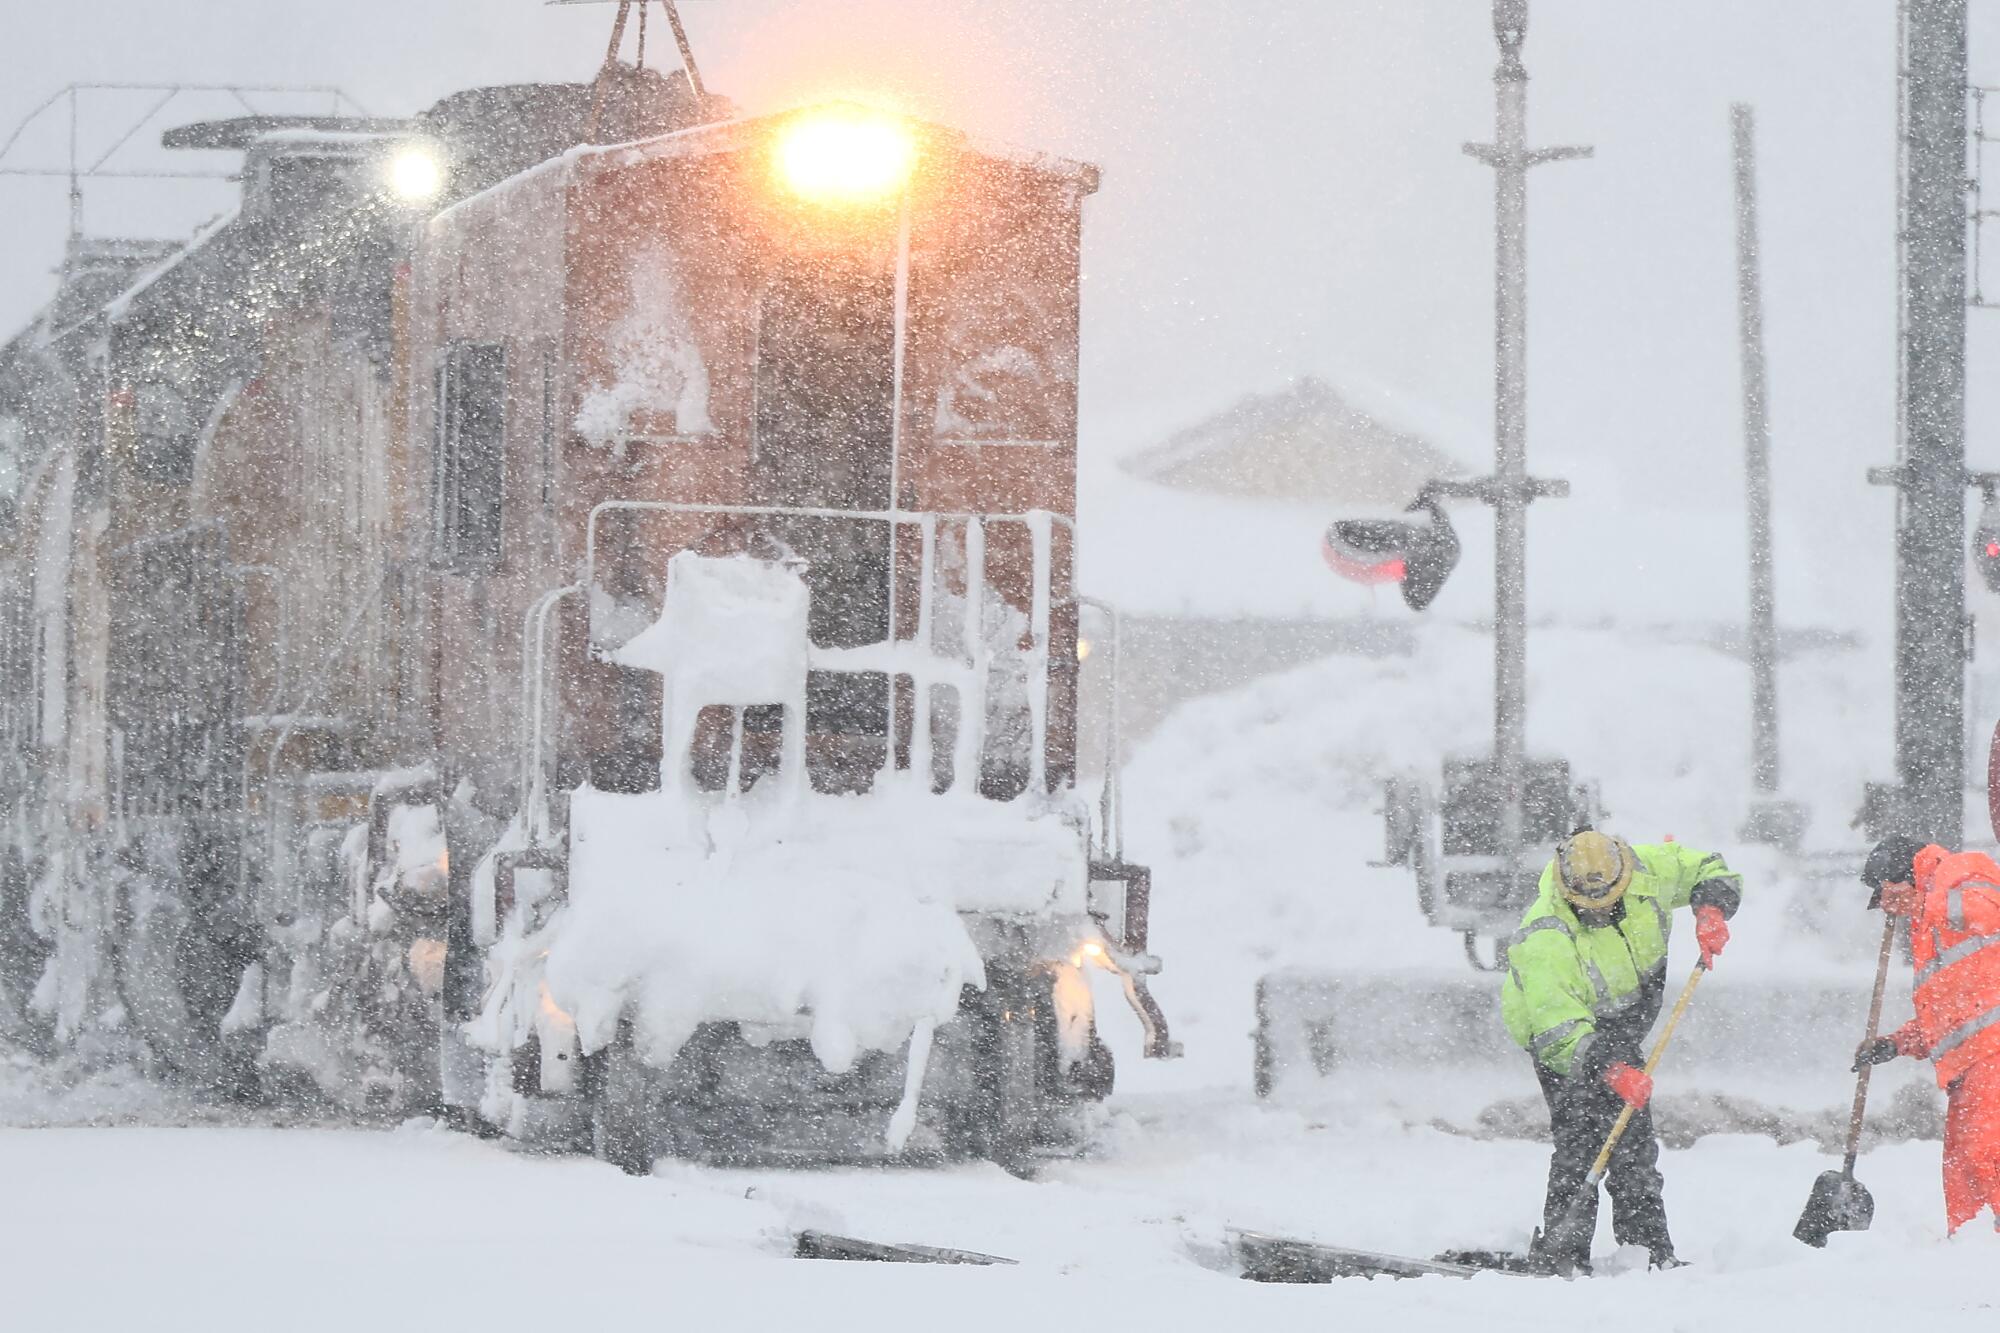 Workers clear train tracks as snow falls during a powerful winter storm.